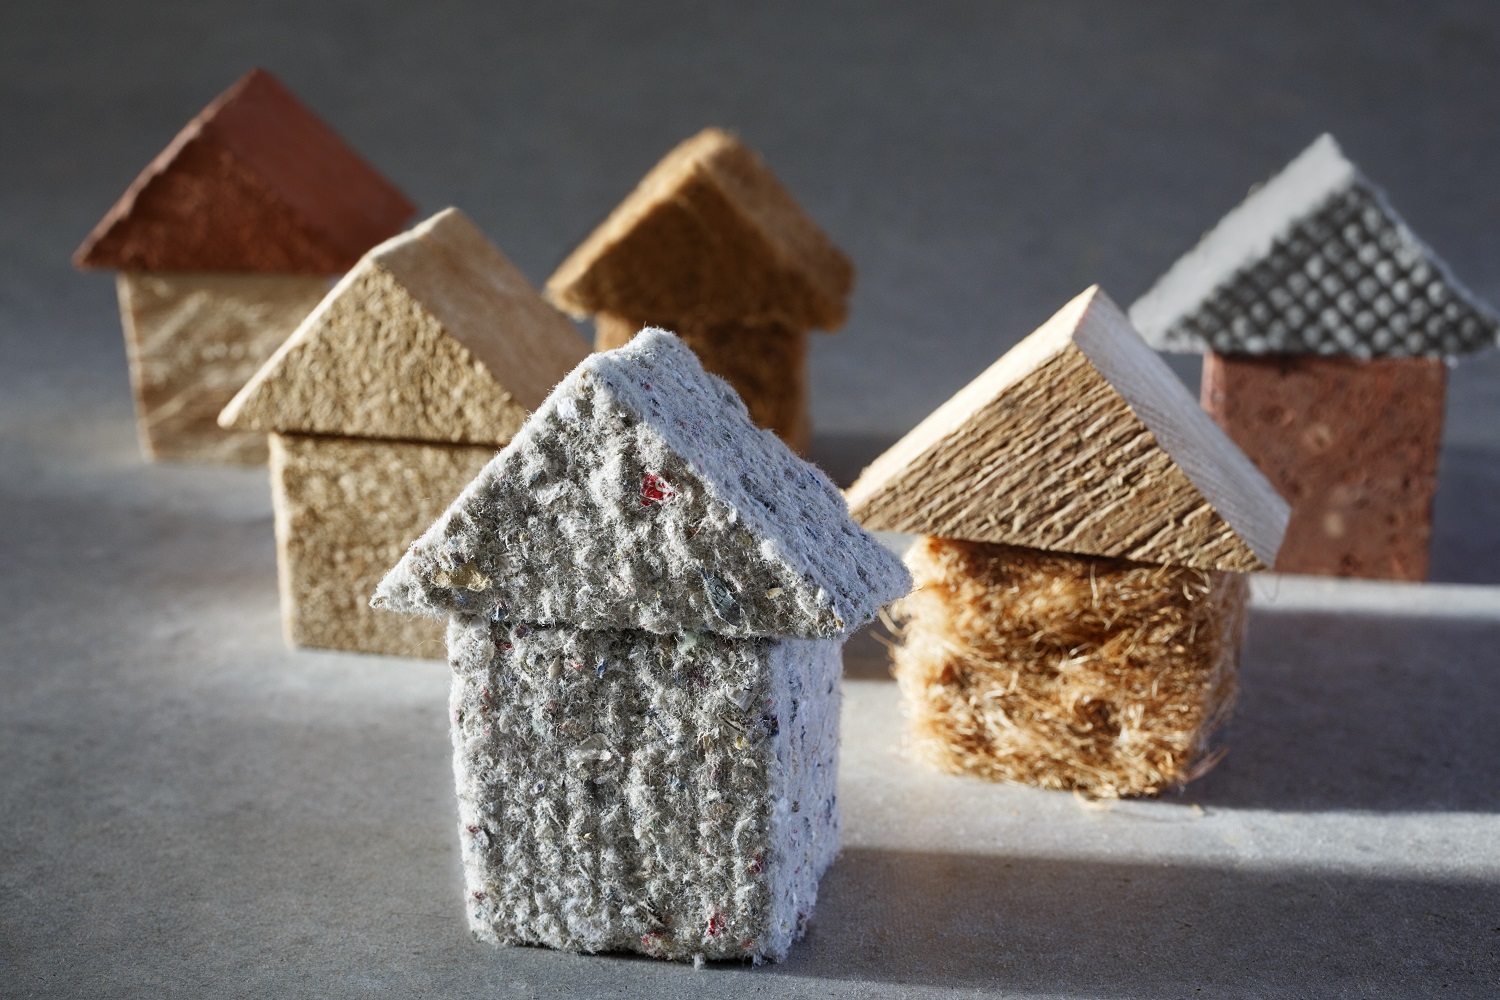 Sustainable Building Materials to Use in Your Home